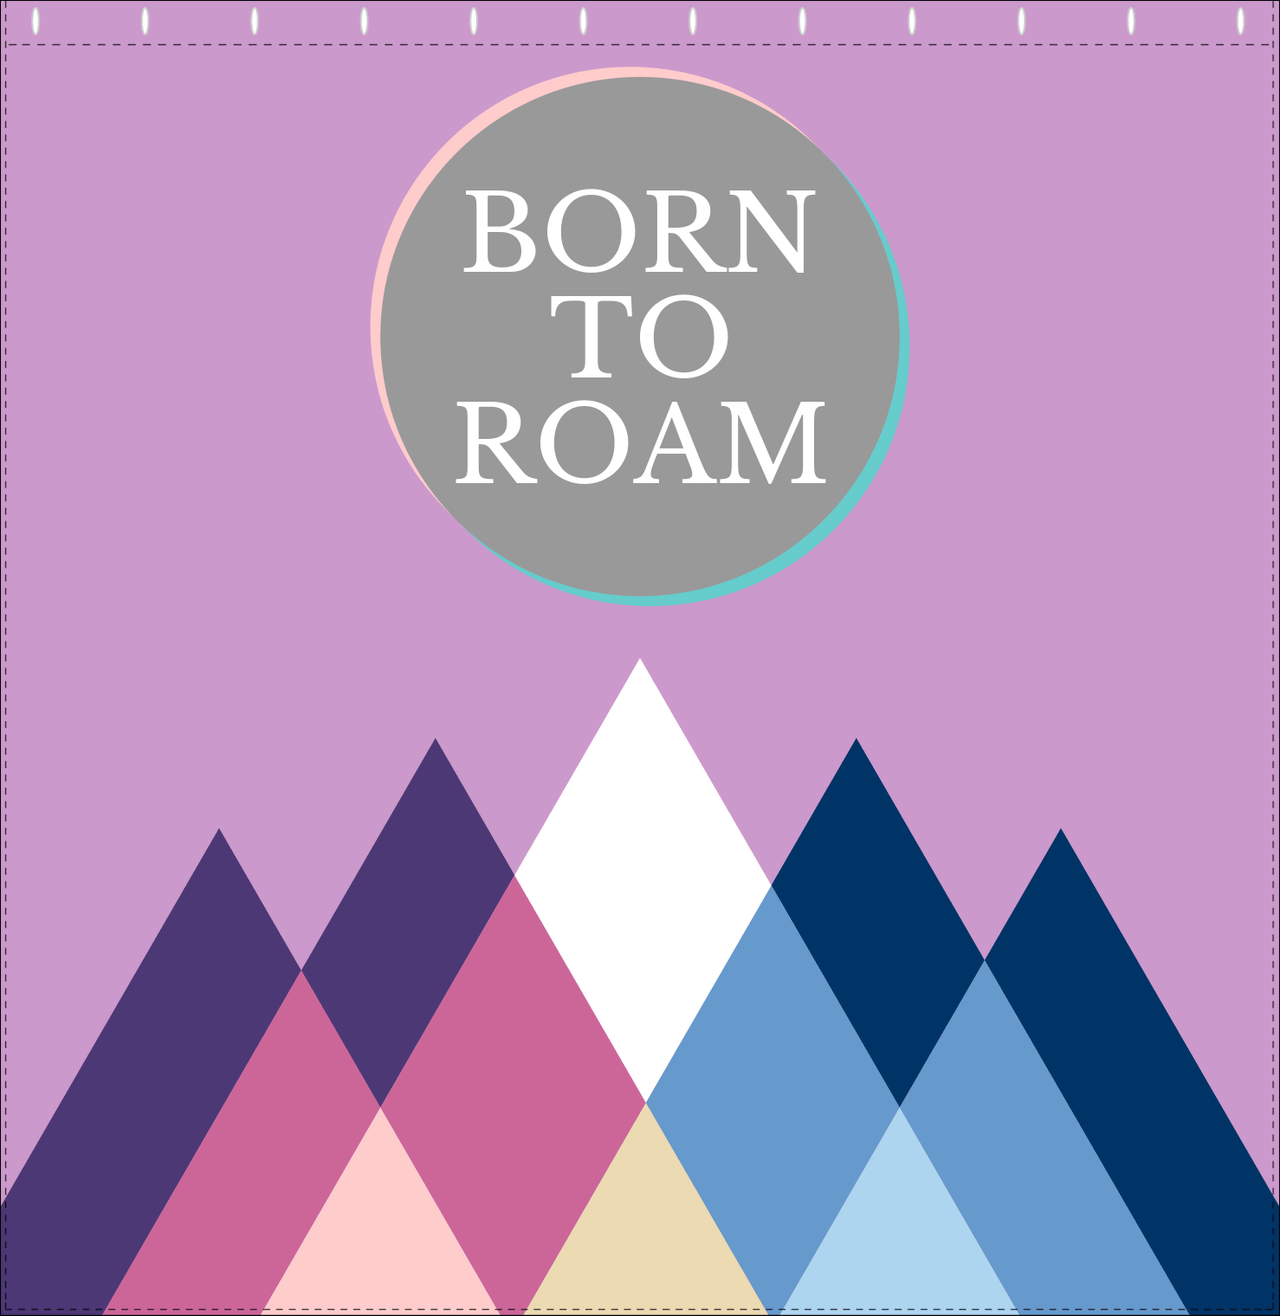 Personalized Mountain Range Shower Curtain - Purple Background - Born To Roam - Decorate View